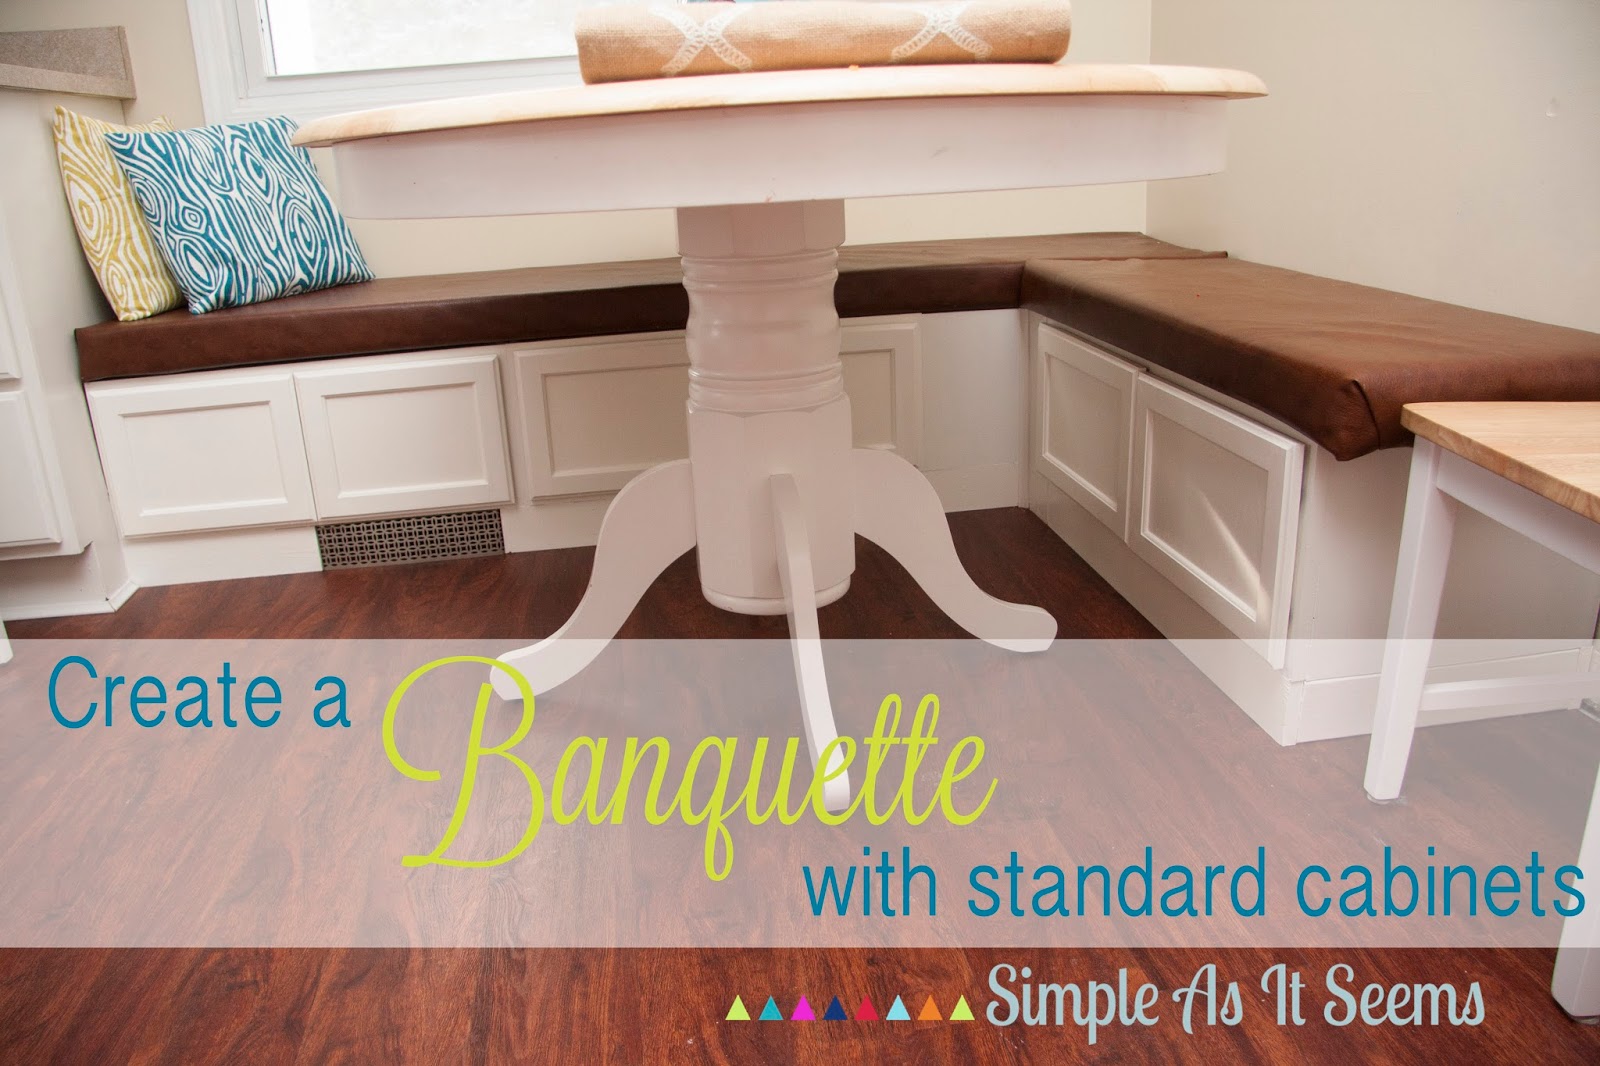 Simple As It Seems DIY Kitchen Banquette Seating From Cabinets